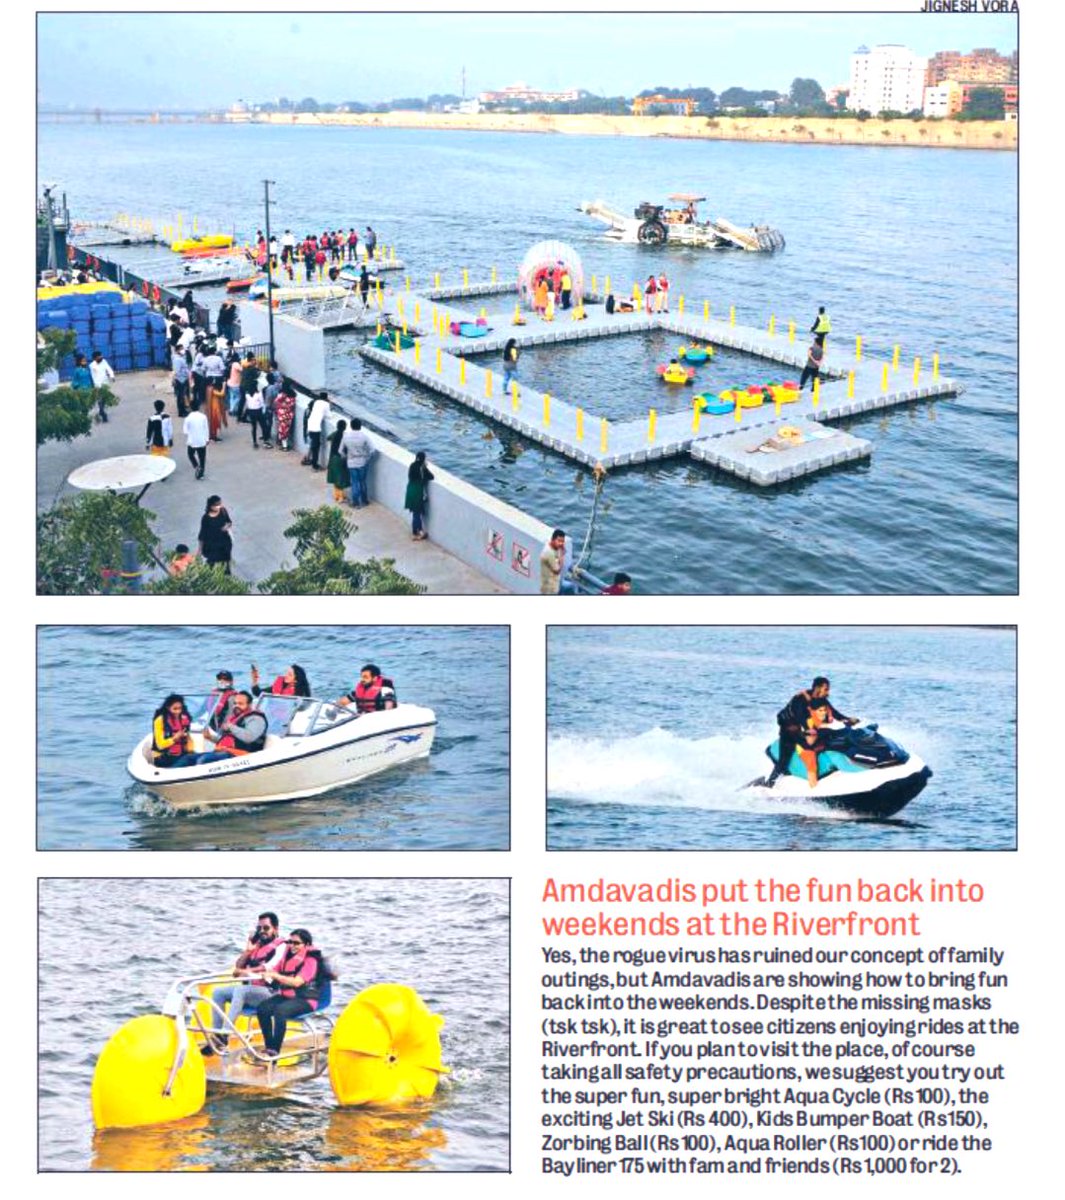 RT @Mukeshias: AMC
More entertainment activities at Riverfront, Ahmedabad. 
(Pic: Ahmedabad Mirror) https://t.co/e0Y7YbEoGA